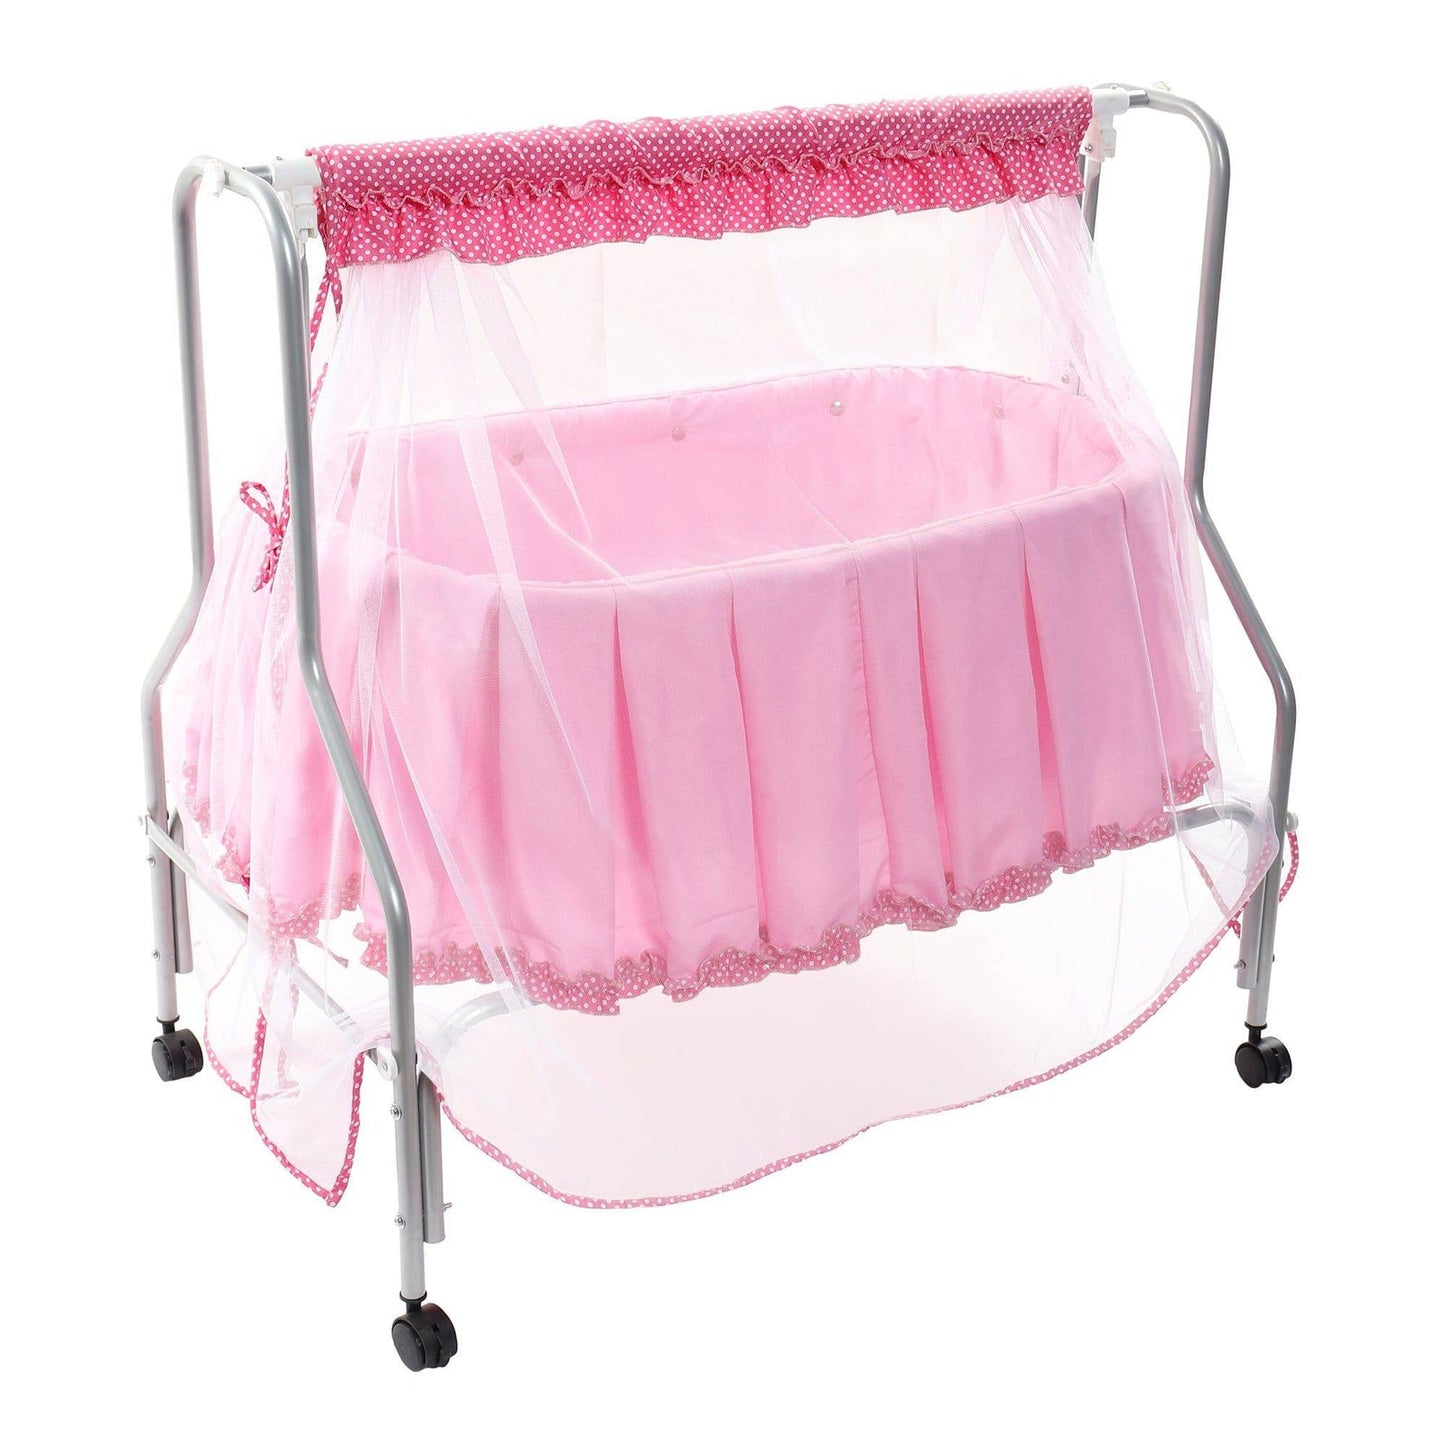 Small Baby Swing Cradle